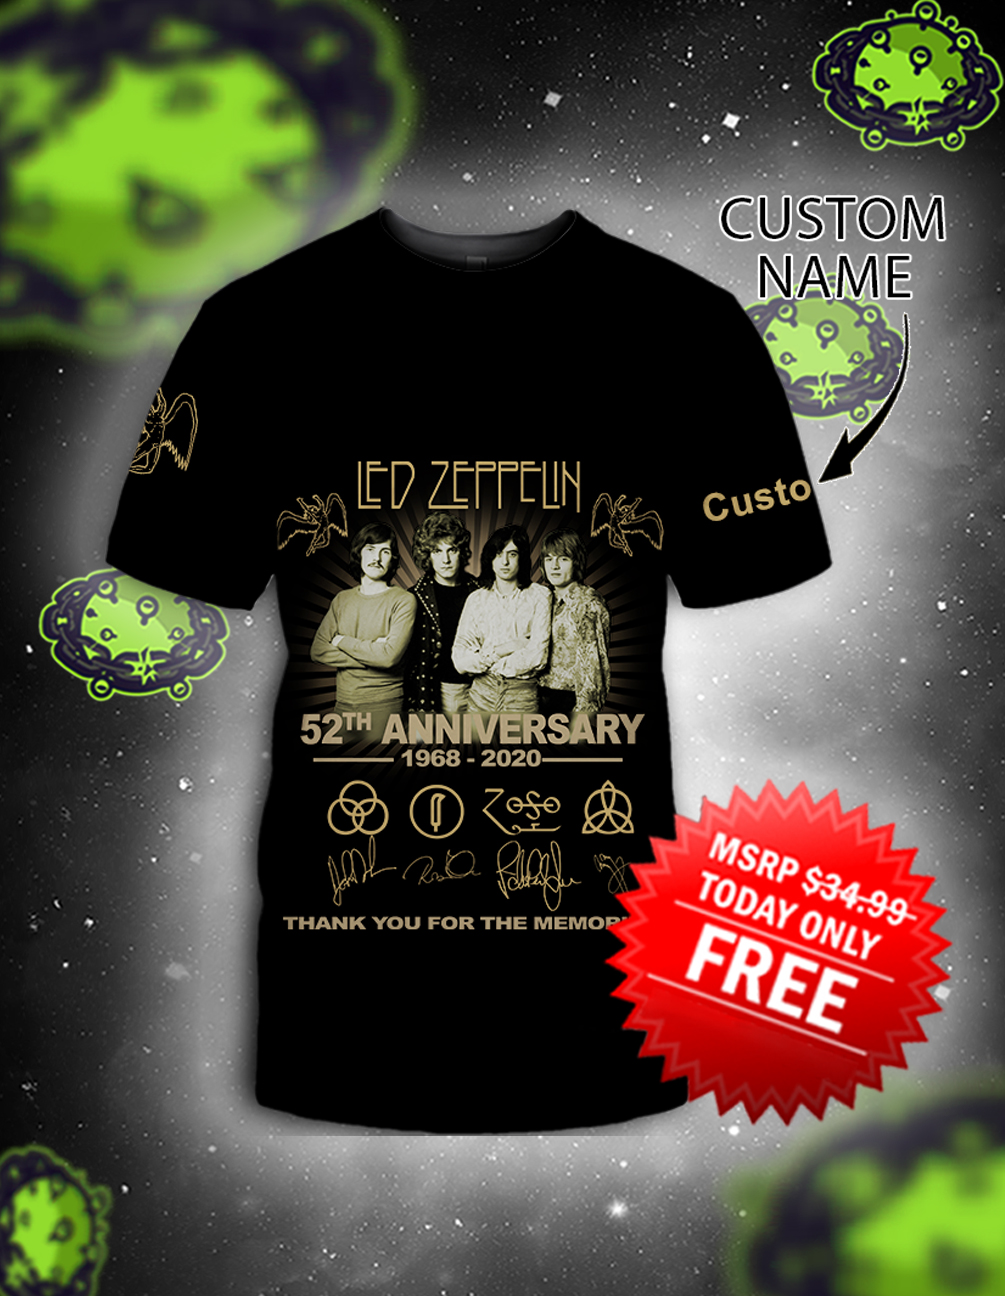 Led zeppelin 52th anniversary personalized custom name 3d shirt